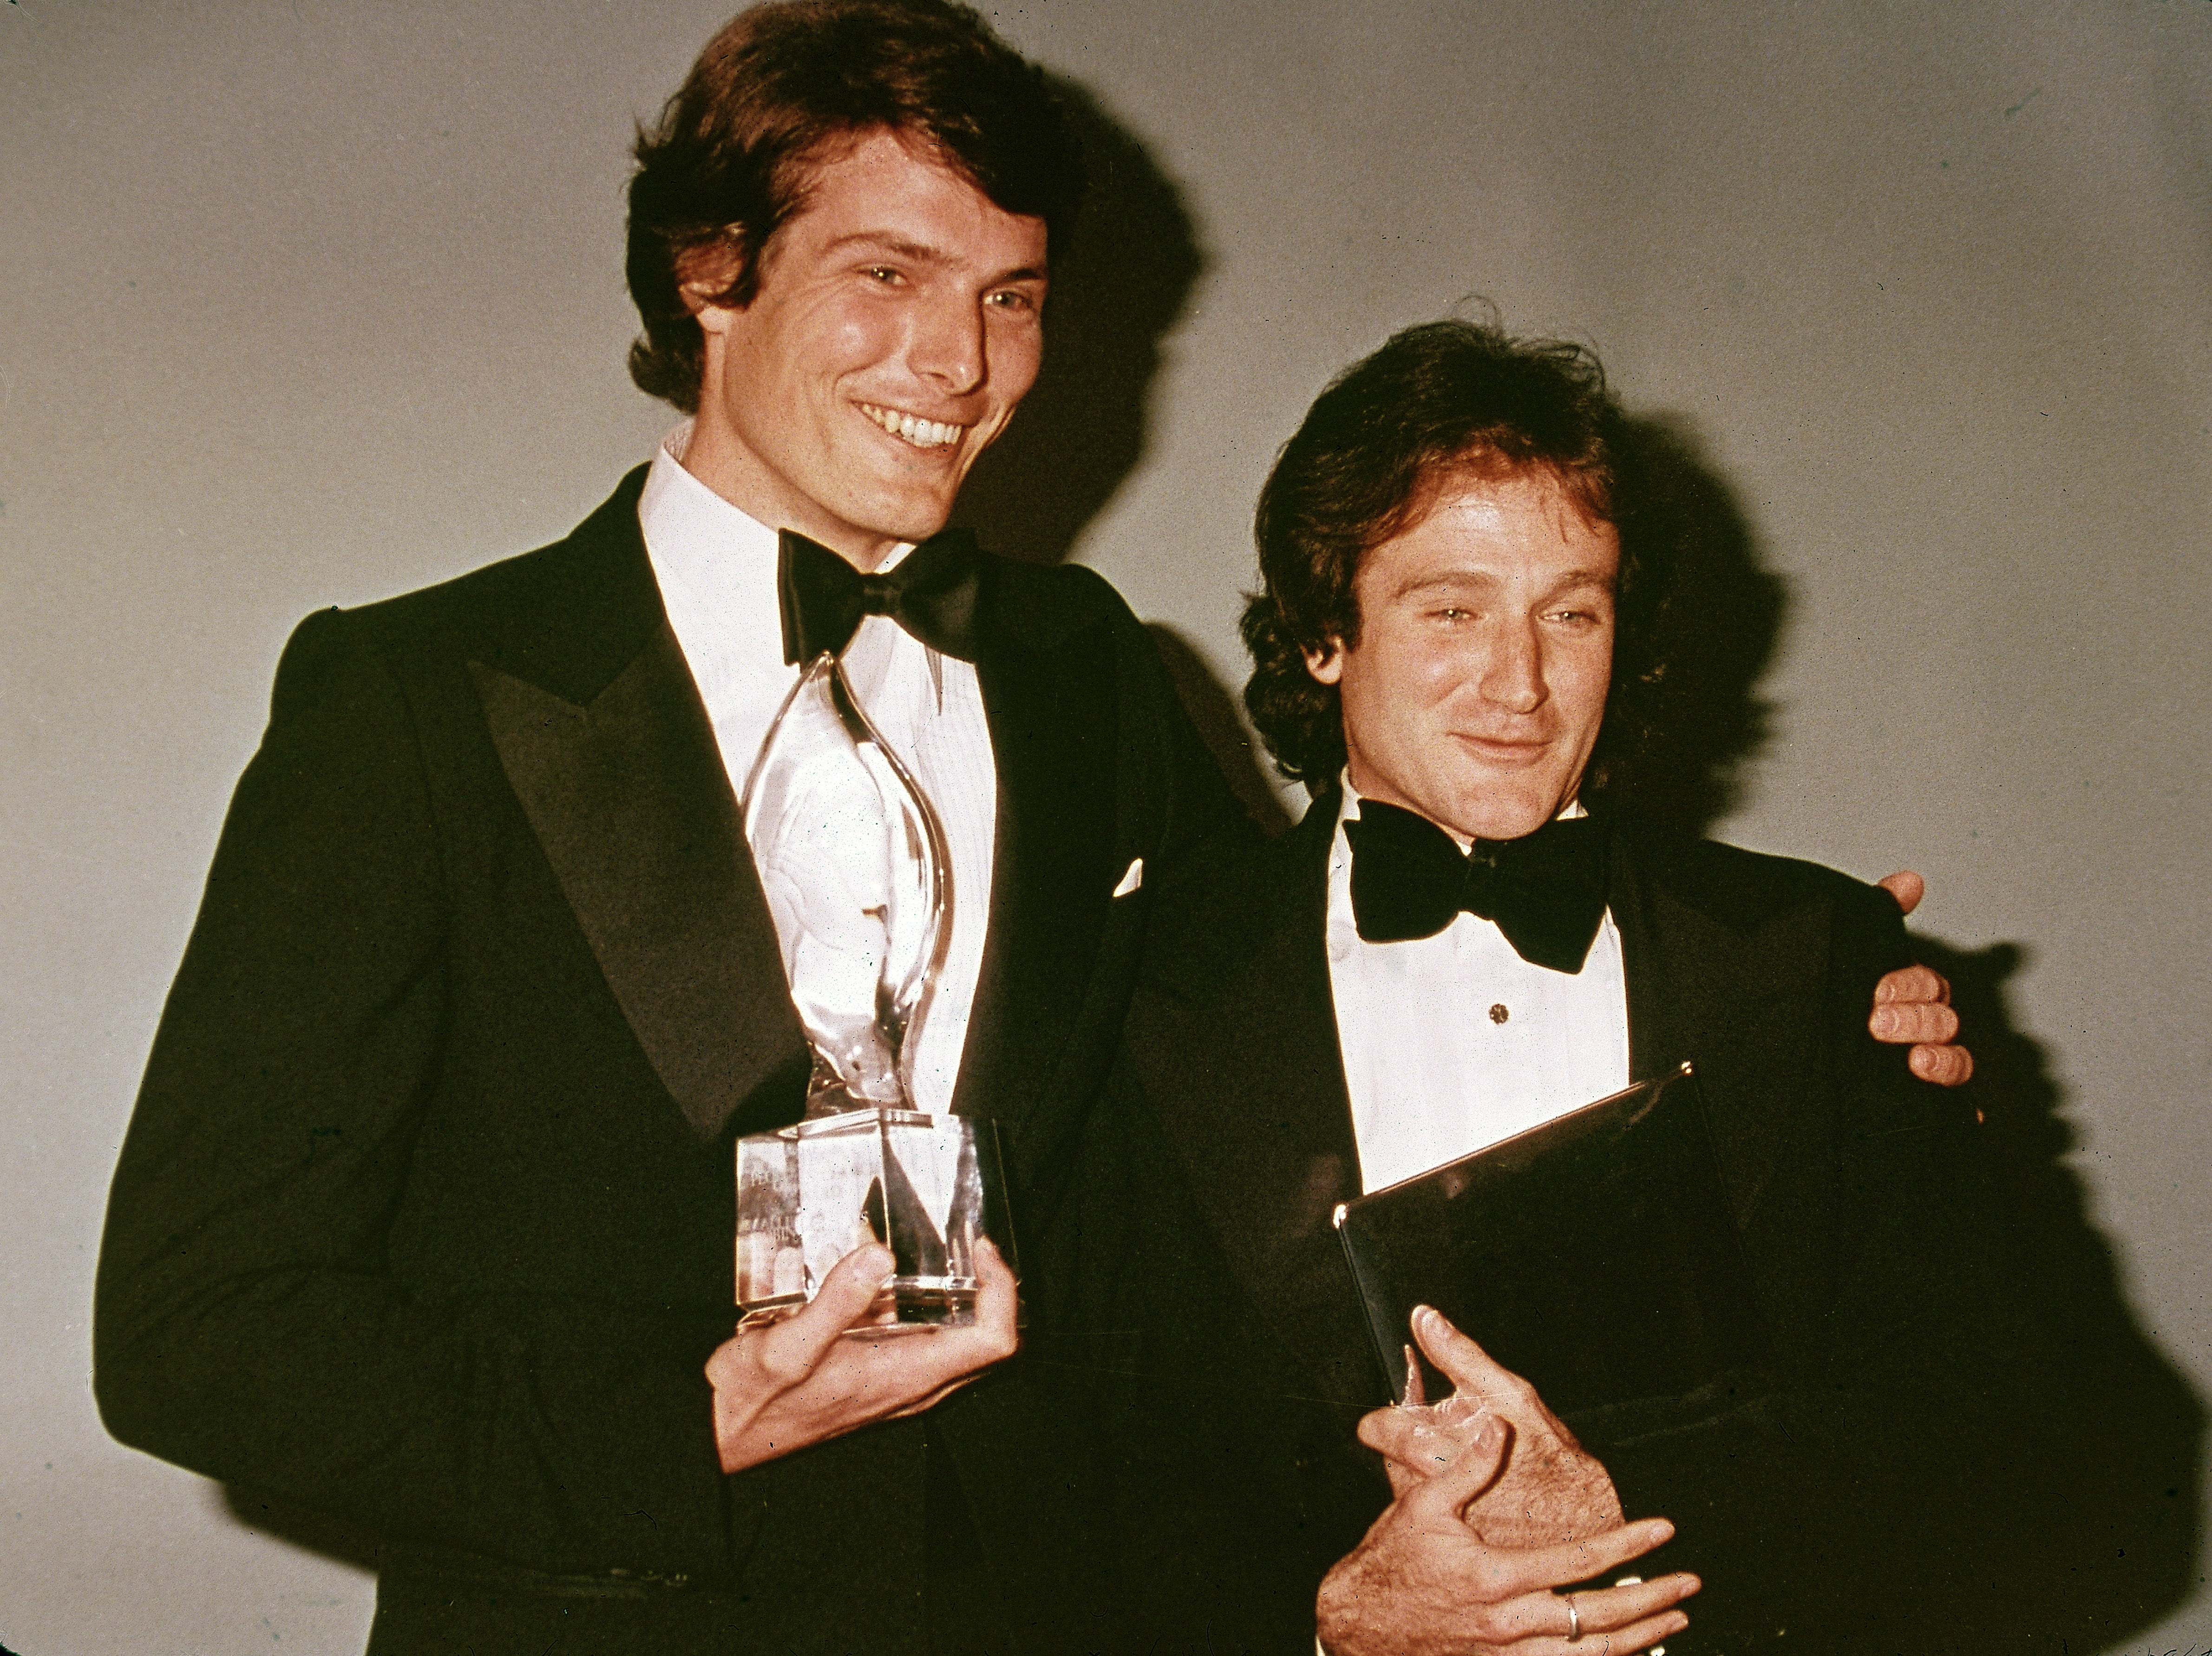 Christopher Reeve and Robbie Williams at the People's Choice Awards, 1979. | Source: Getty Images